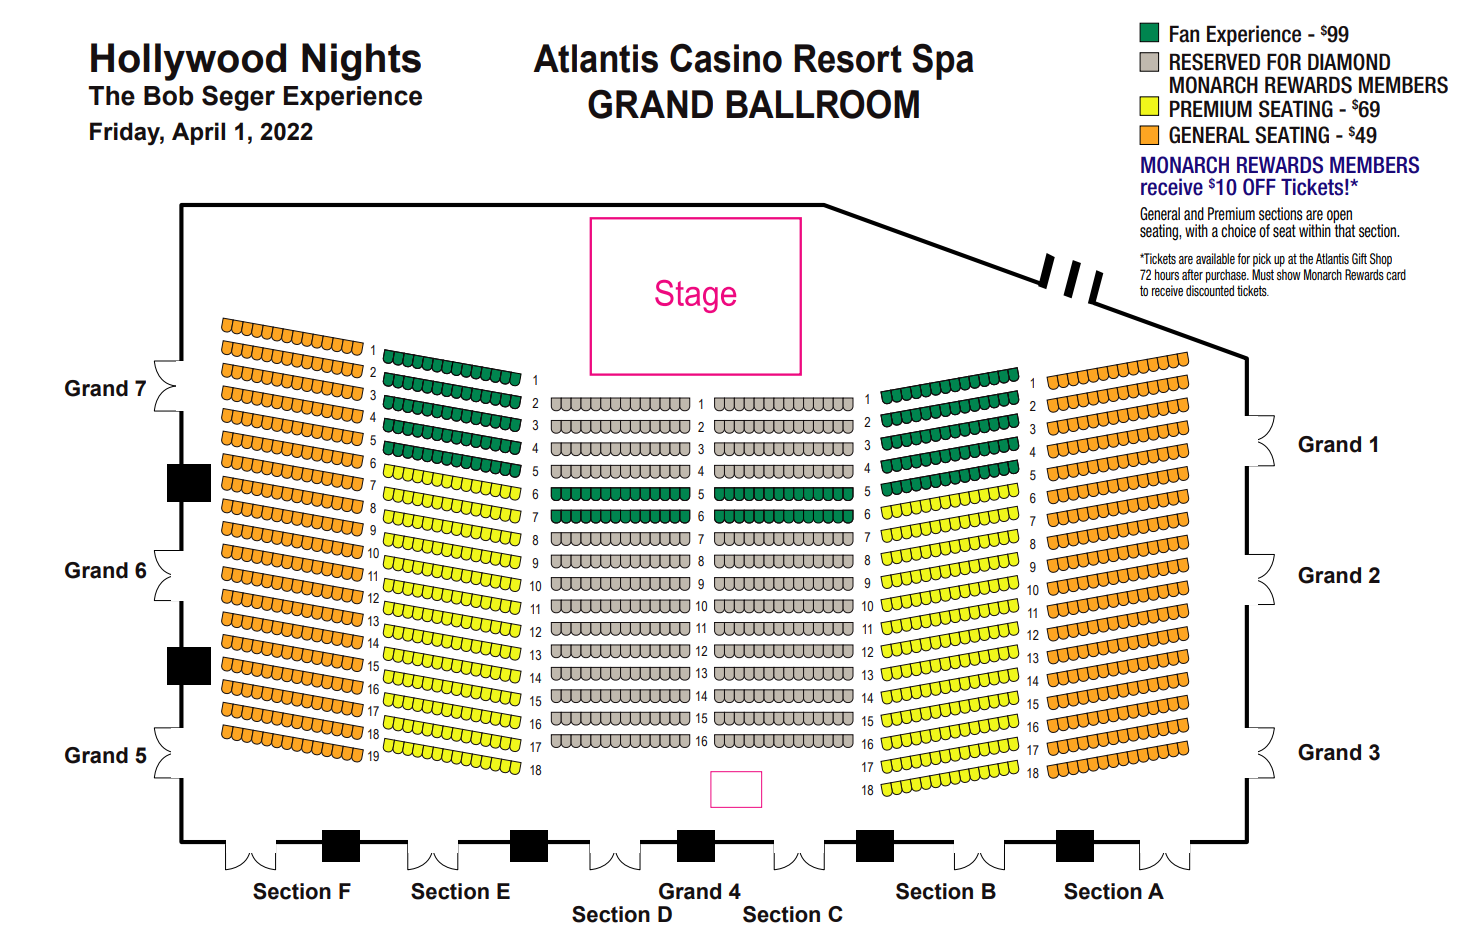 Seating Chart for Hollywood Nights